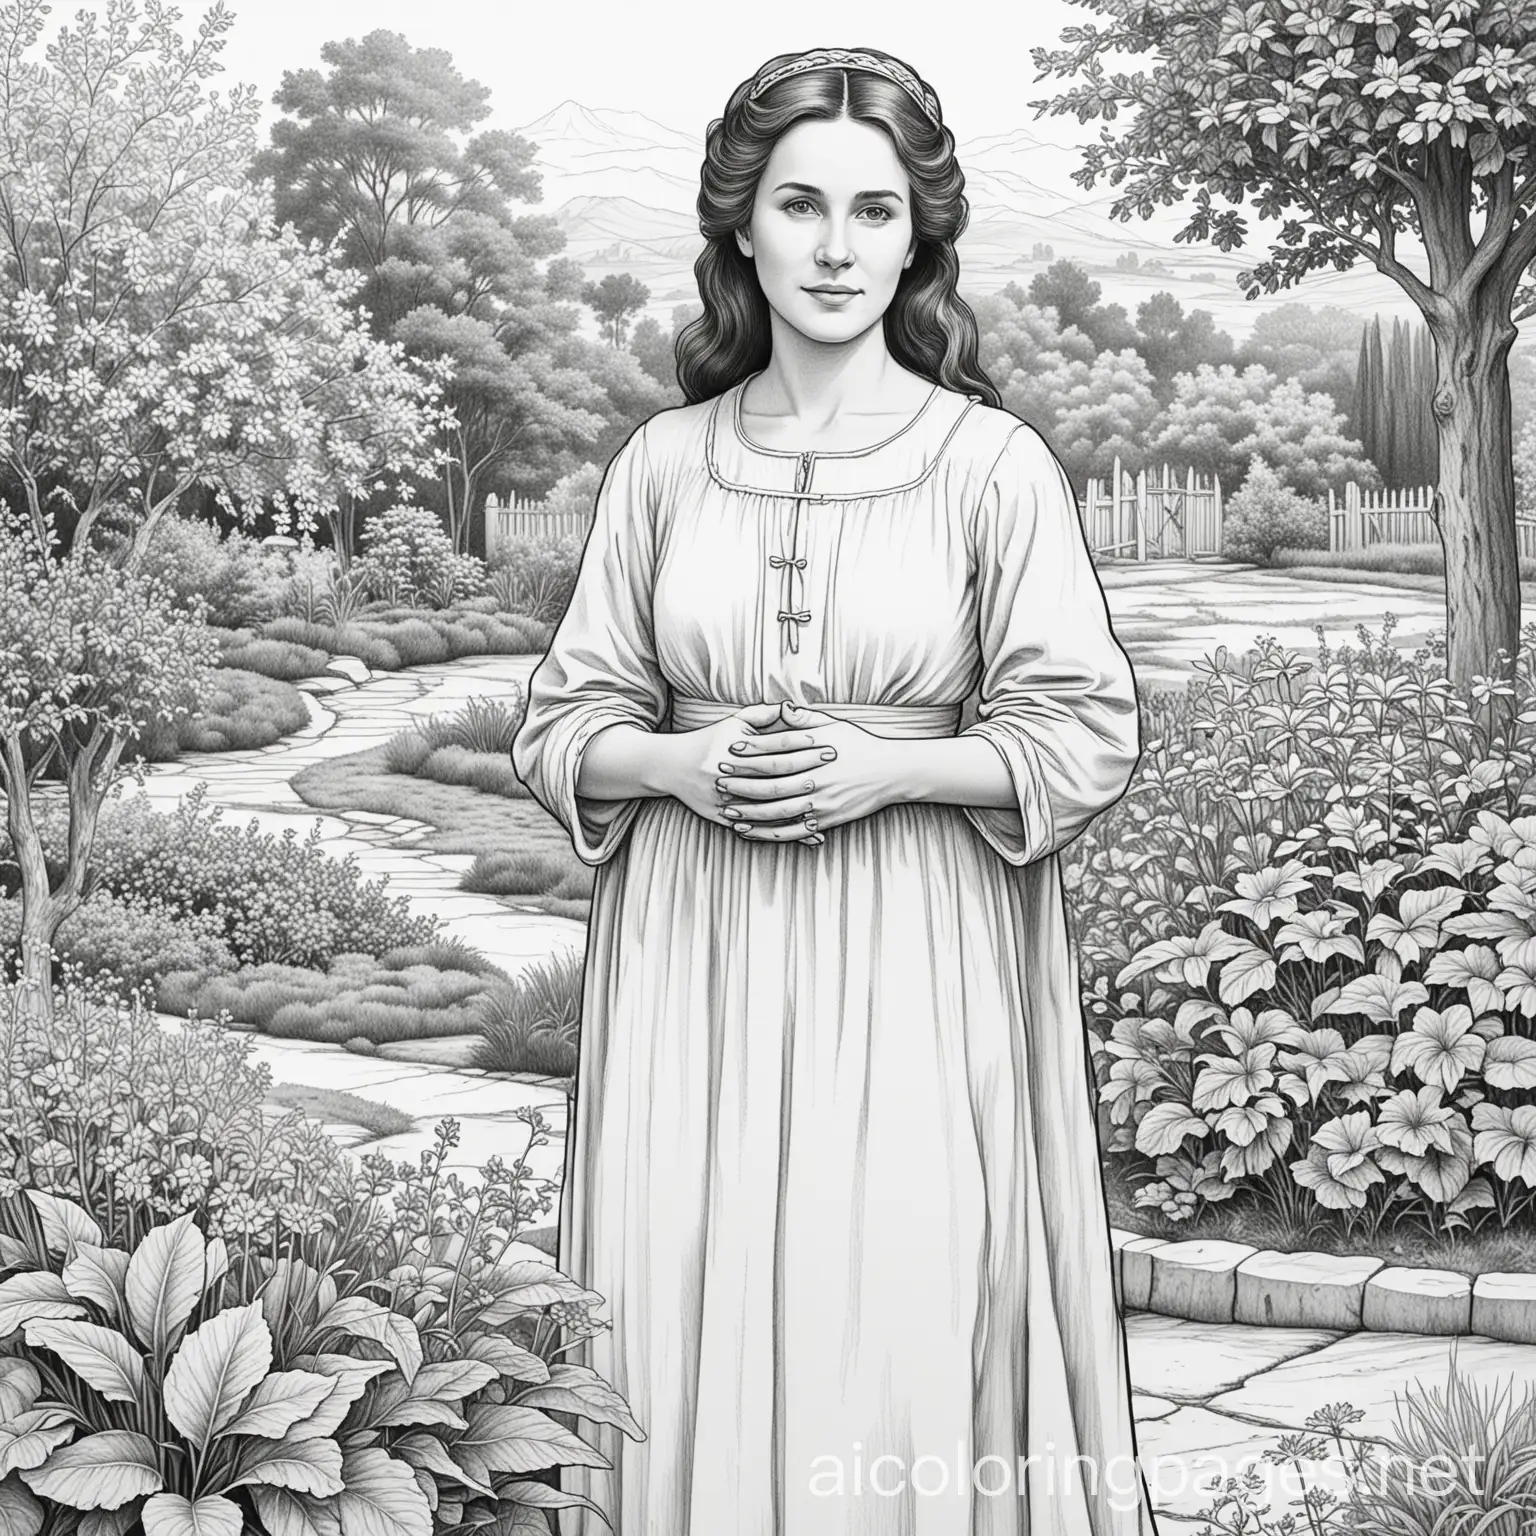 Priscilla-and-Aquila-Bible-Coloring-Page-in-Garden-Setting